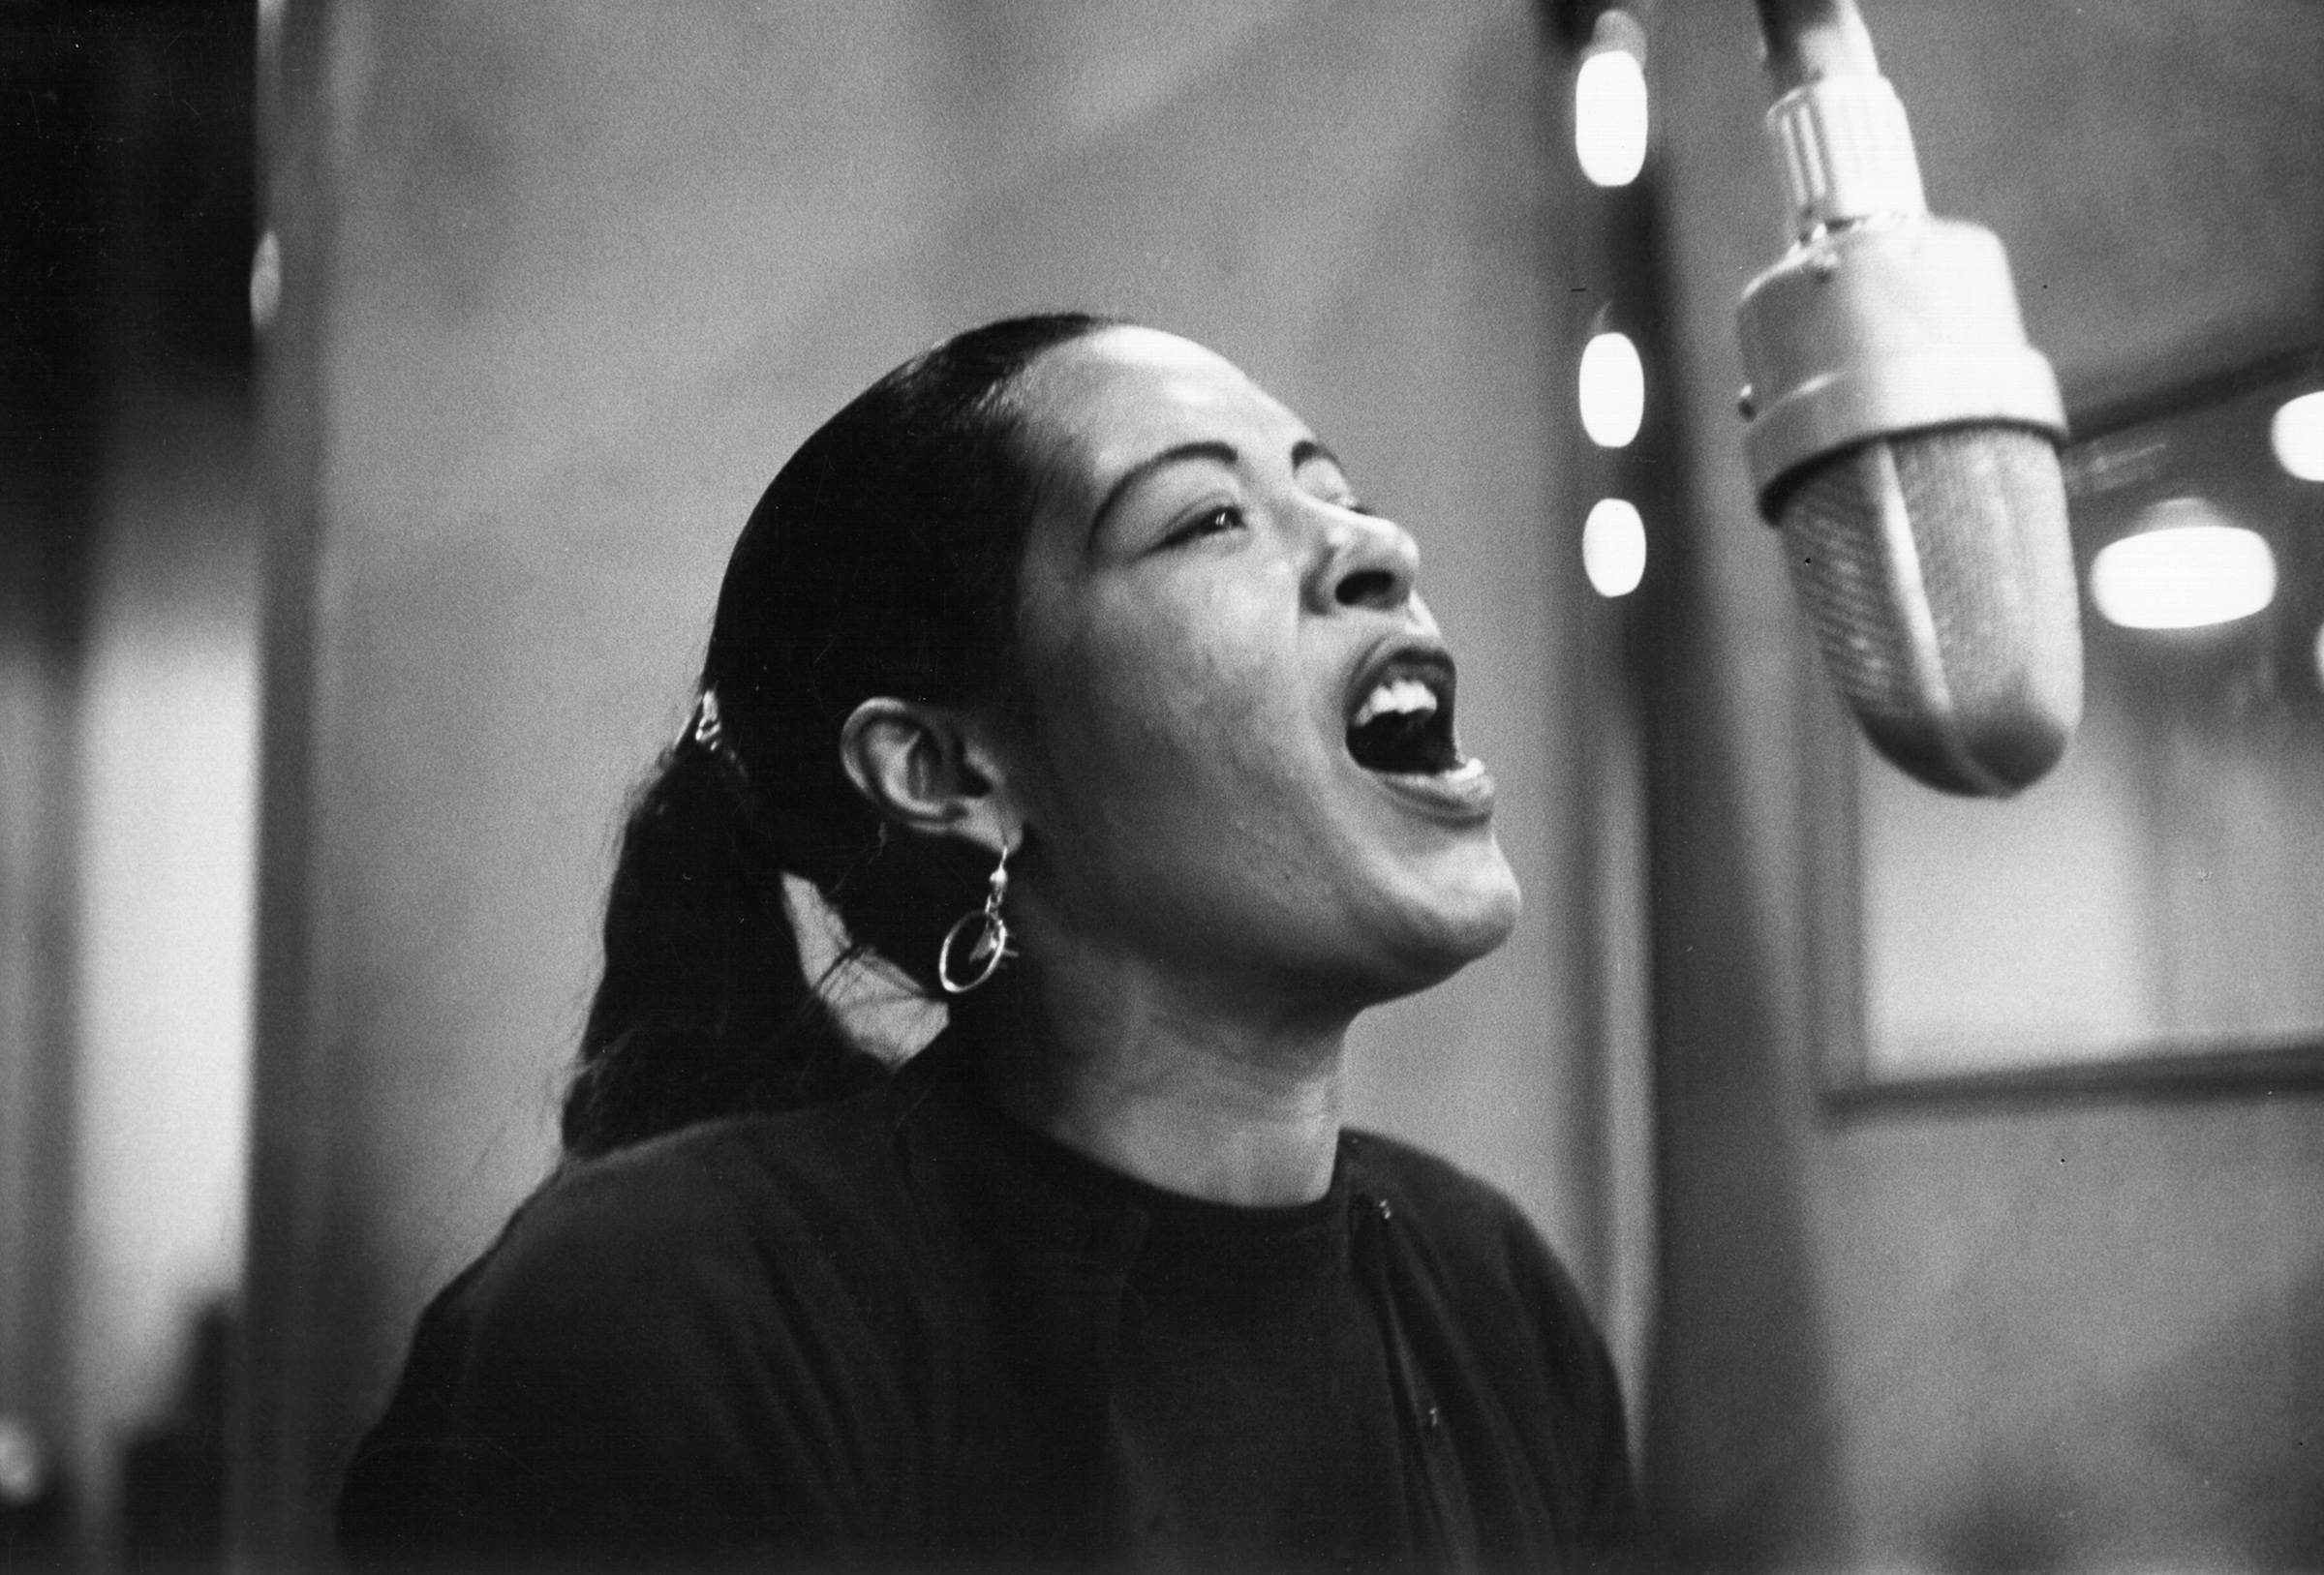 Singer Billie Holiday records her penultimate album at the Columbia Records studio in New York in Dec. 1957. (Michael Ochs Archives—Getty Images)